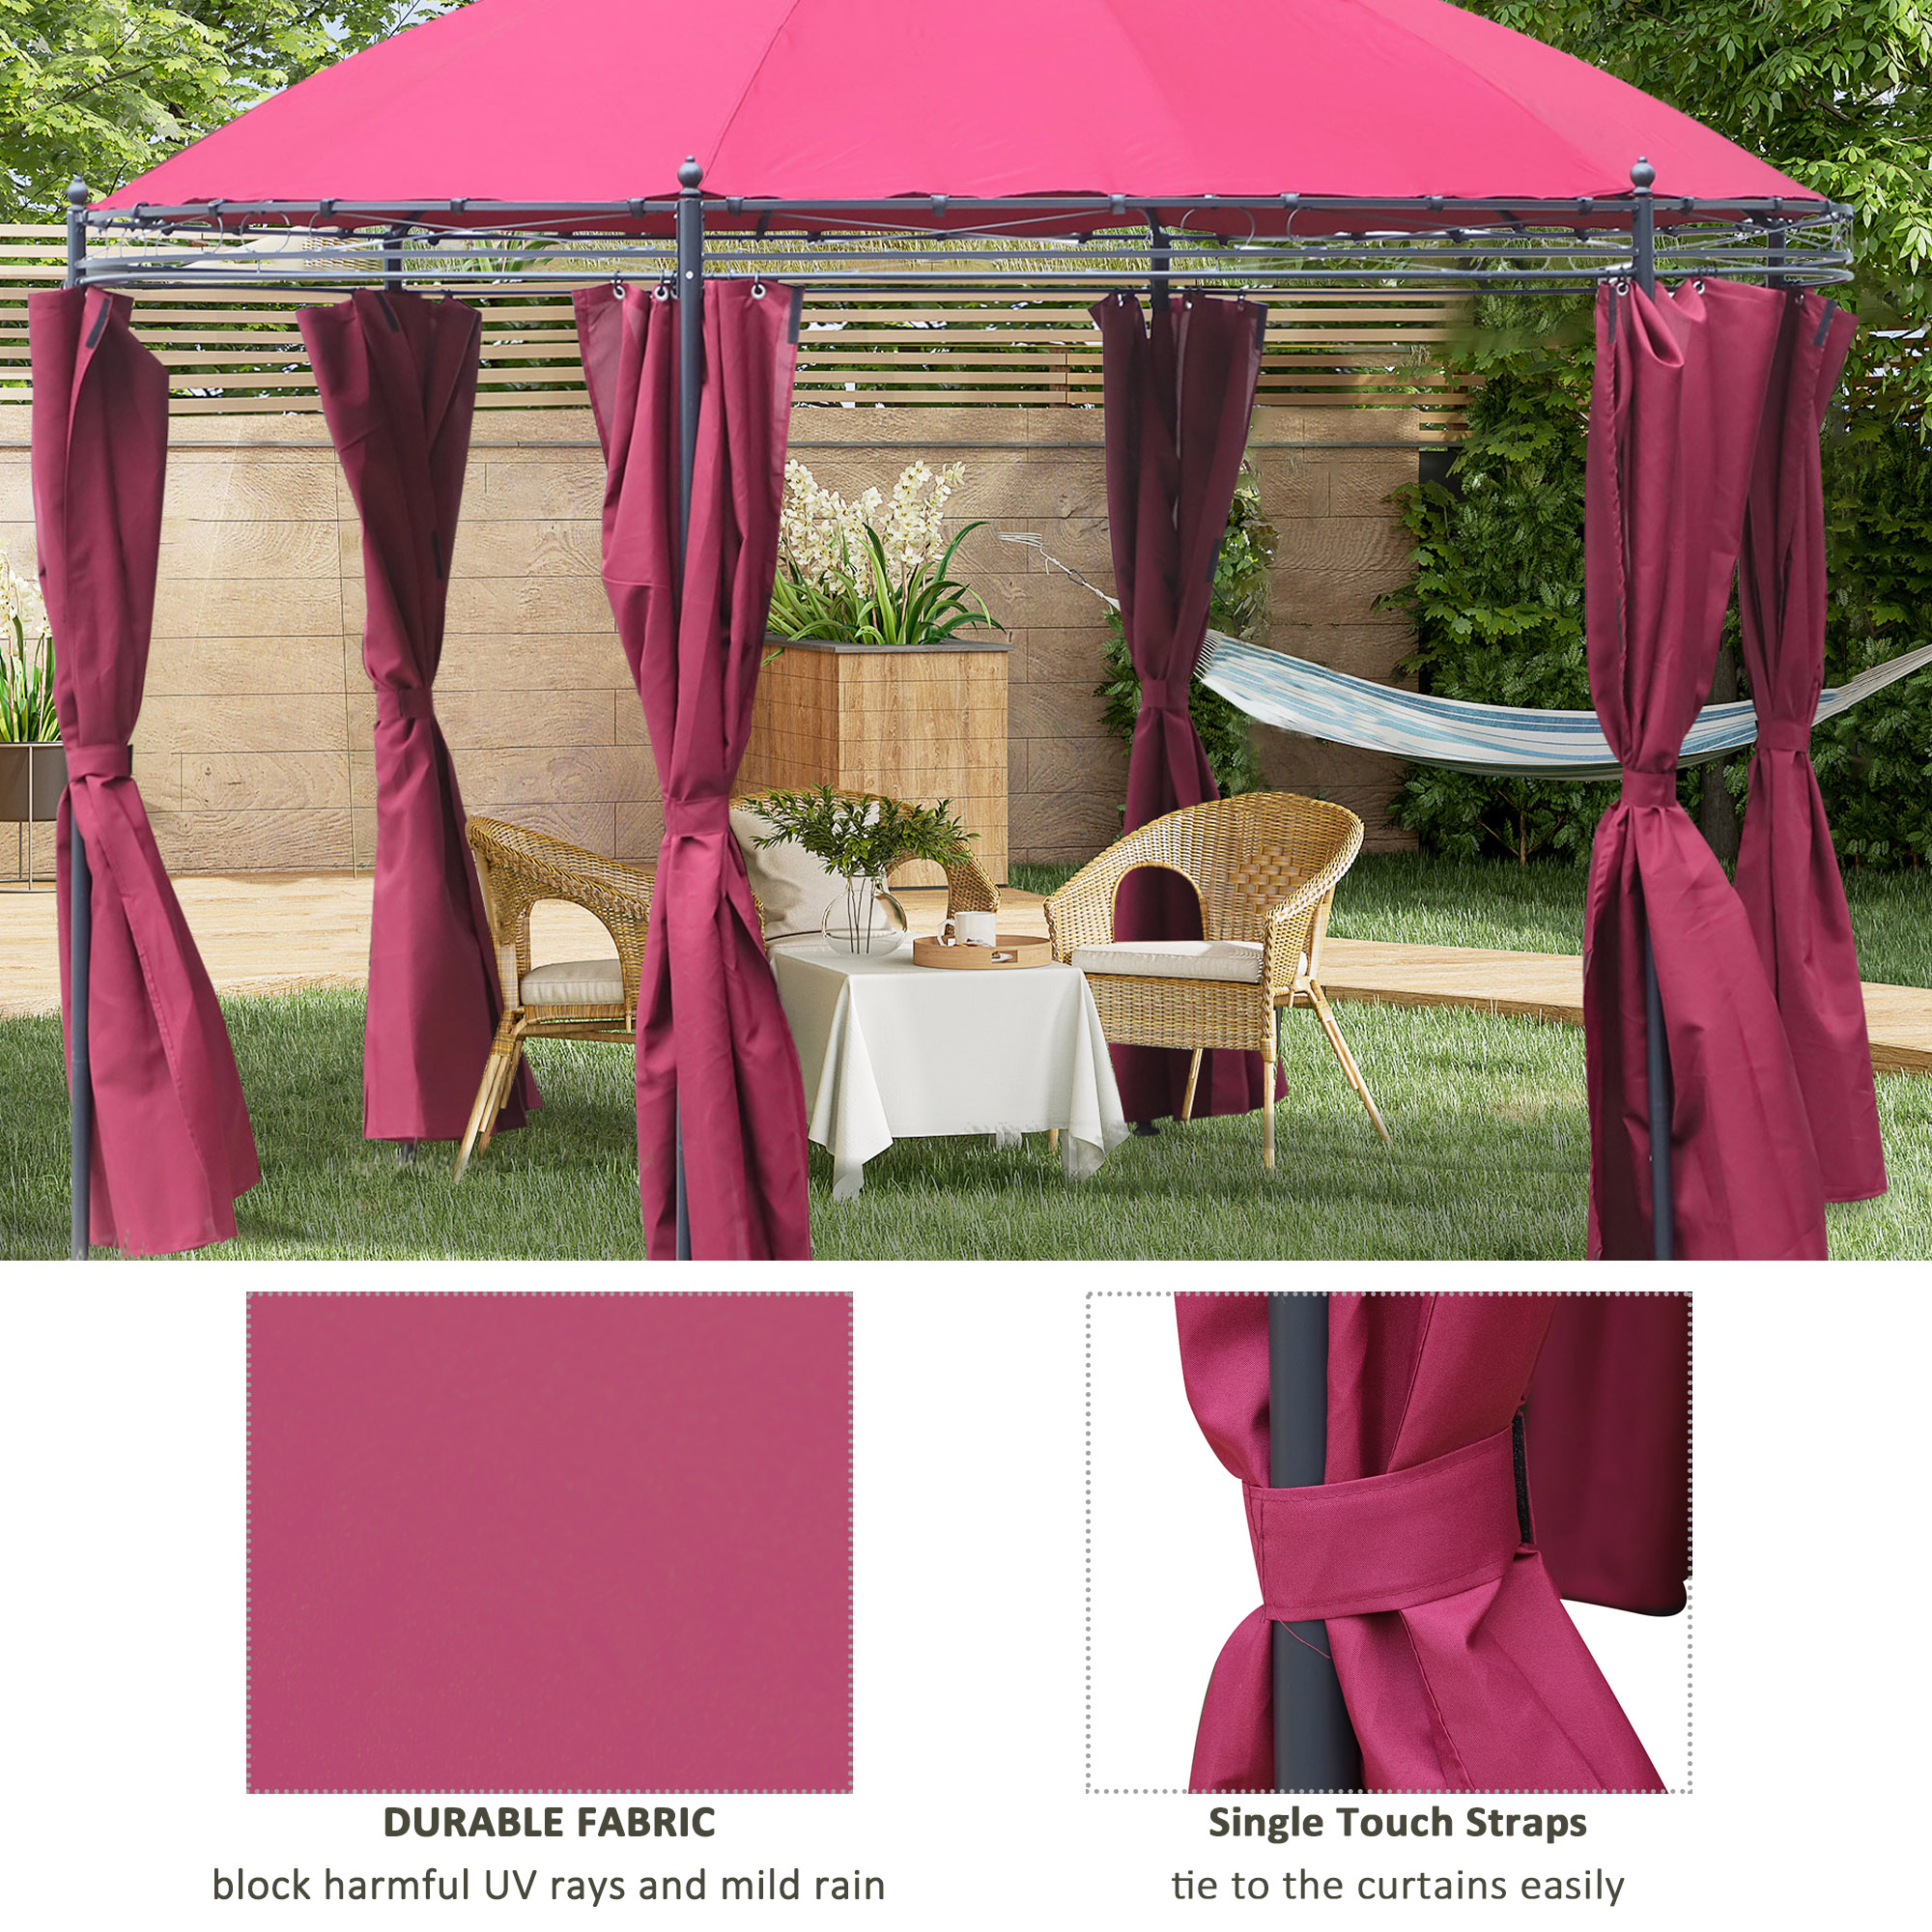 OutsunnyÂ 11.5' Patio Gazebo, Outdoor Gazebo Canopy Shelter with Curtains, Romantic Round Double Roof, Solid Steel Frame for Garden, Lawn, Backyard and Deck, Wine Red - image 5 of 9